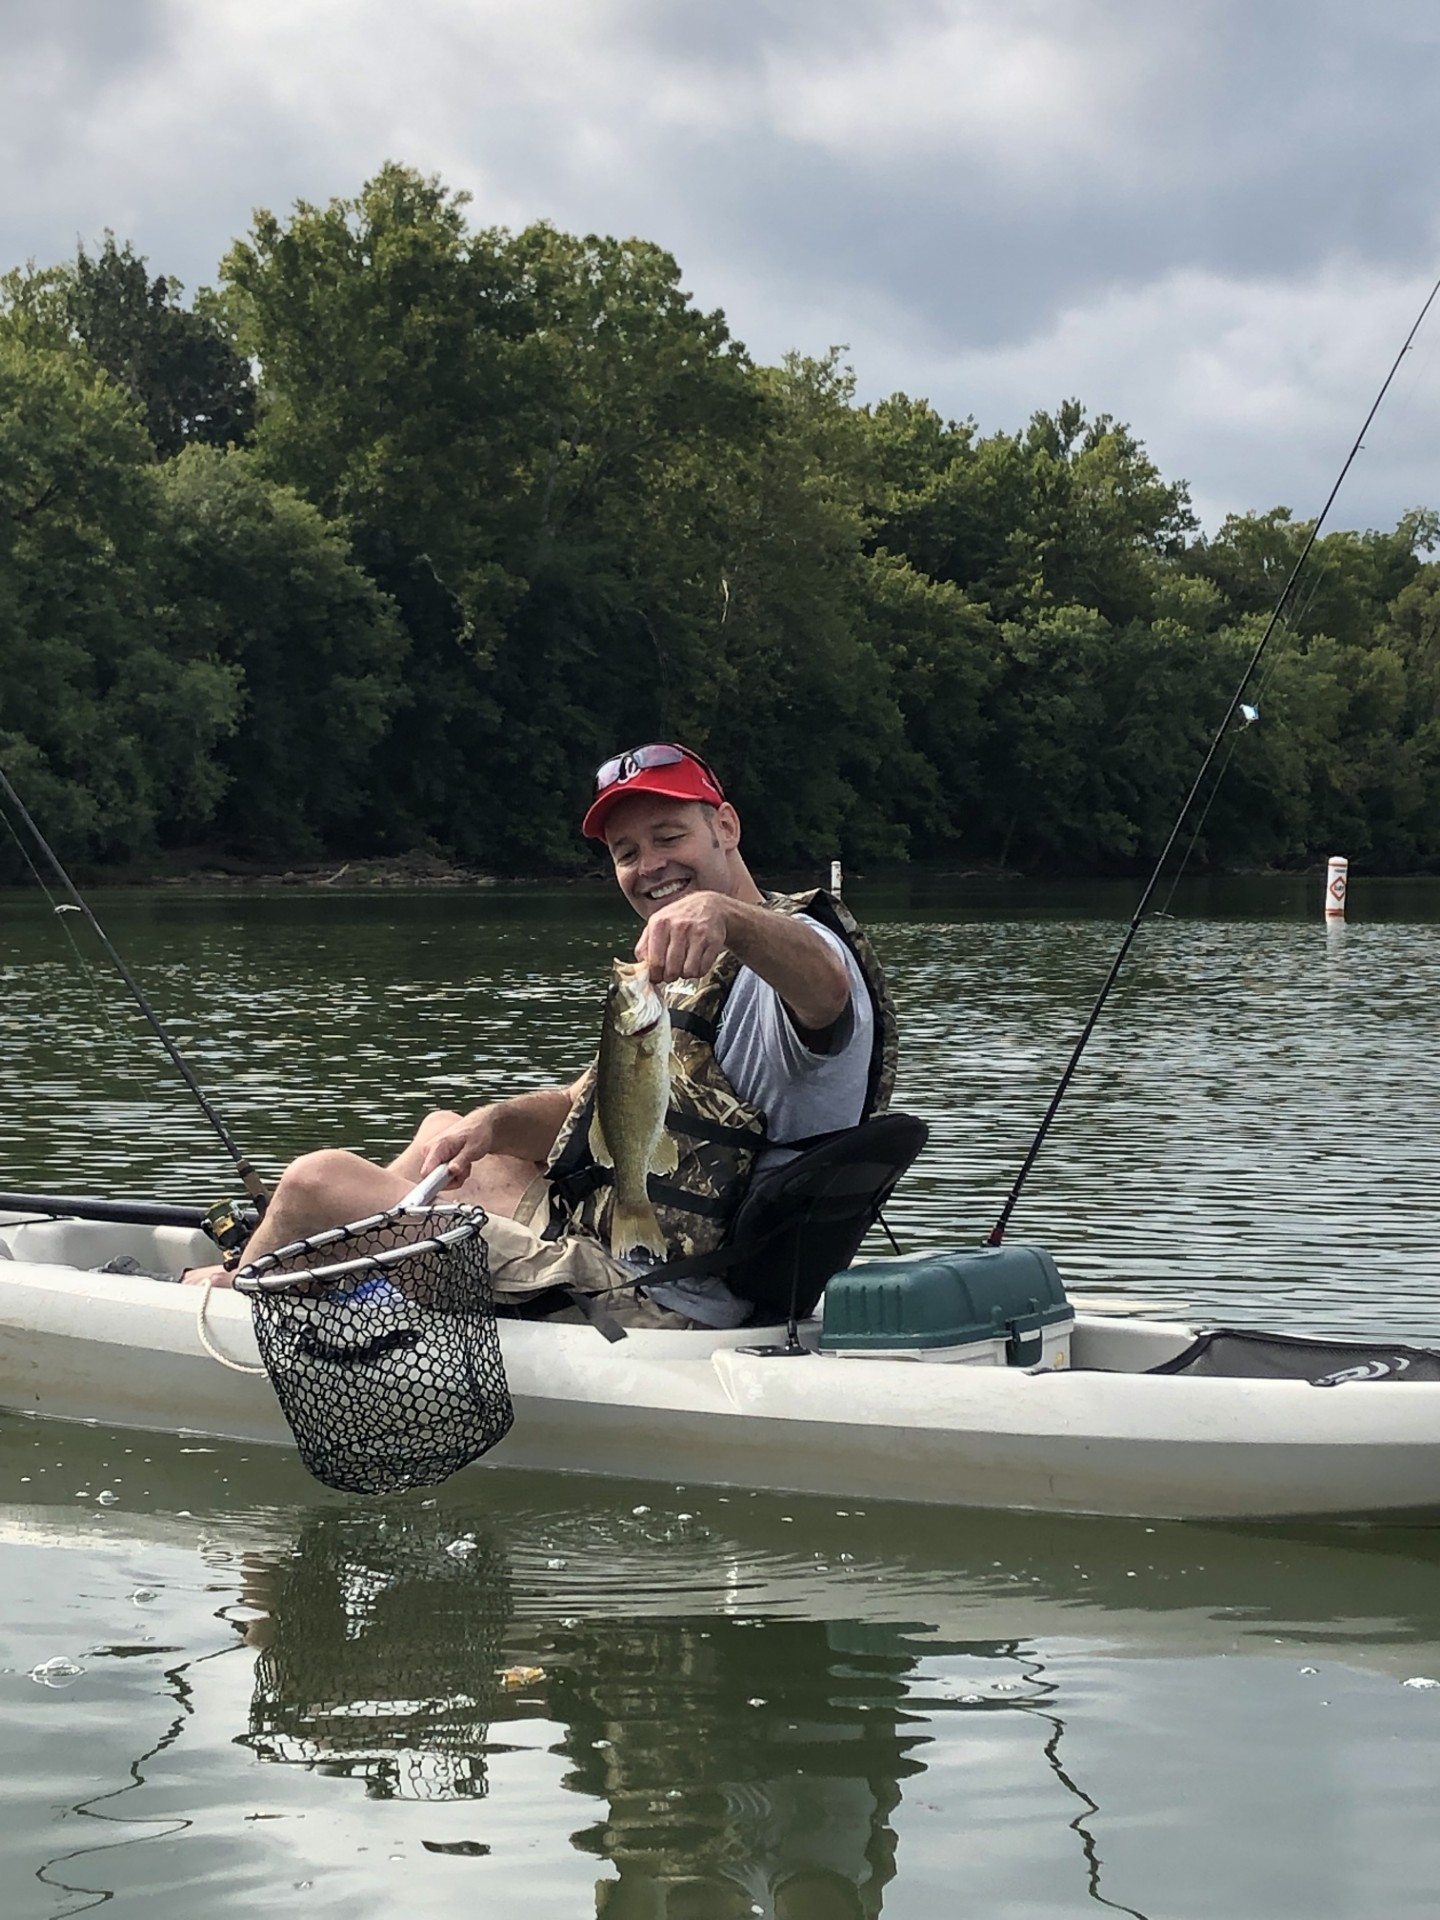 Tony Alonso Fishing in Riverbend Park on Potomac River AV Architects and Builders